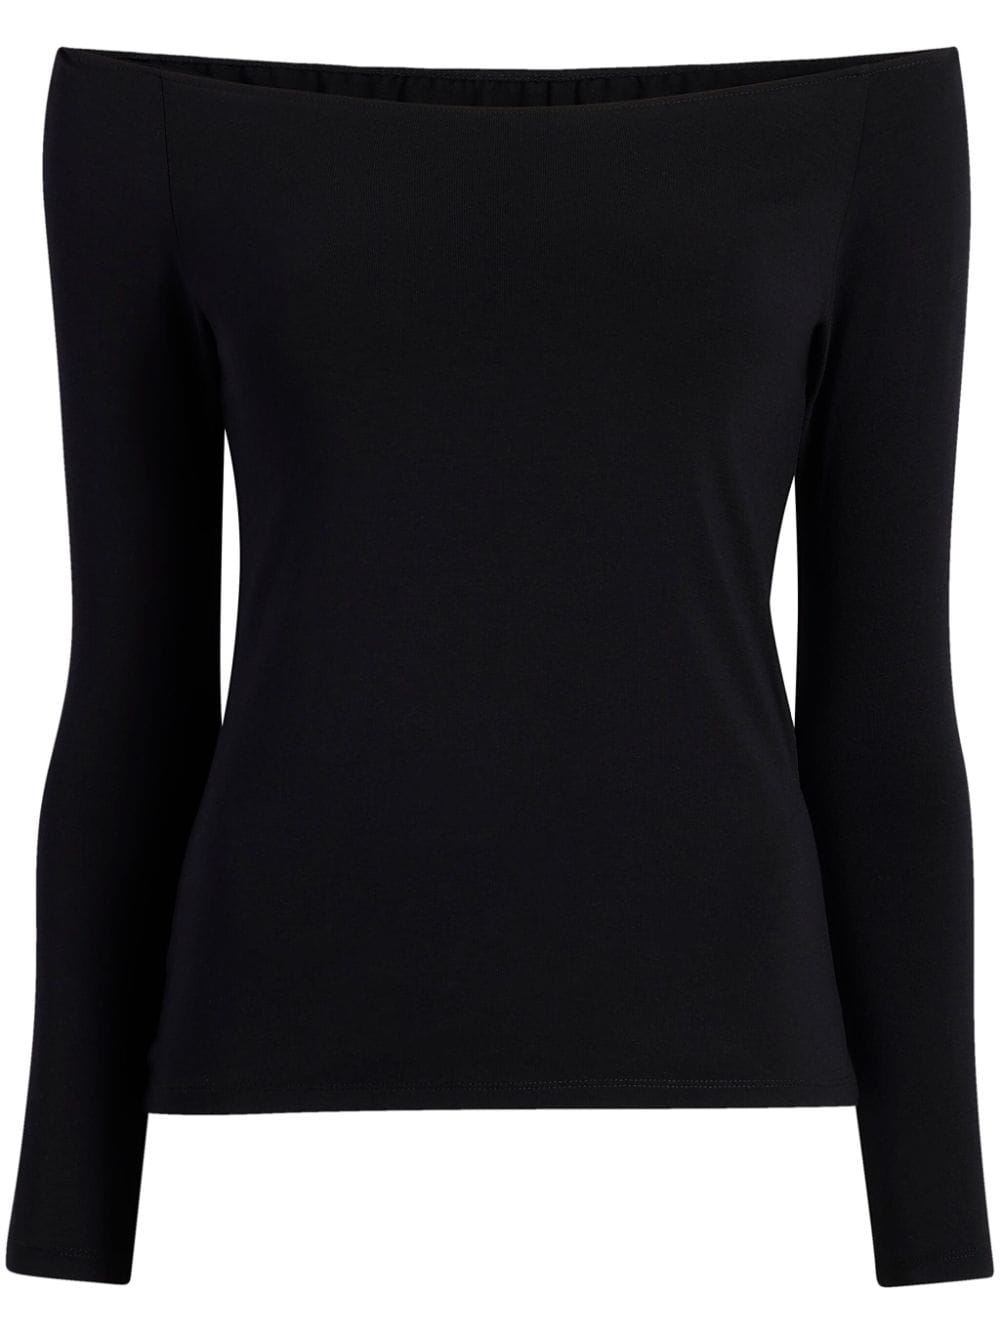 Another Tomorrow Leotard boat-neck top - Black von Another Tomorrow